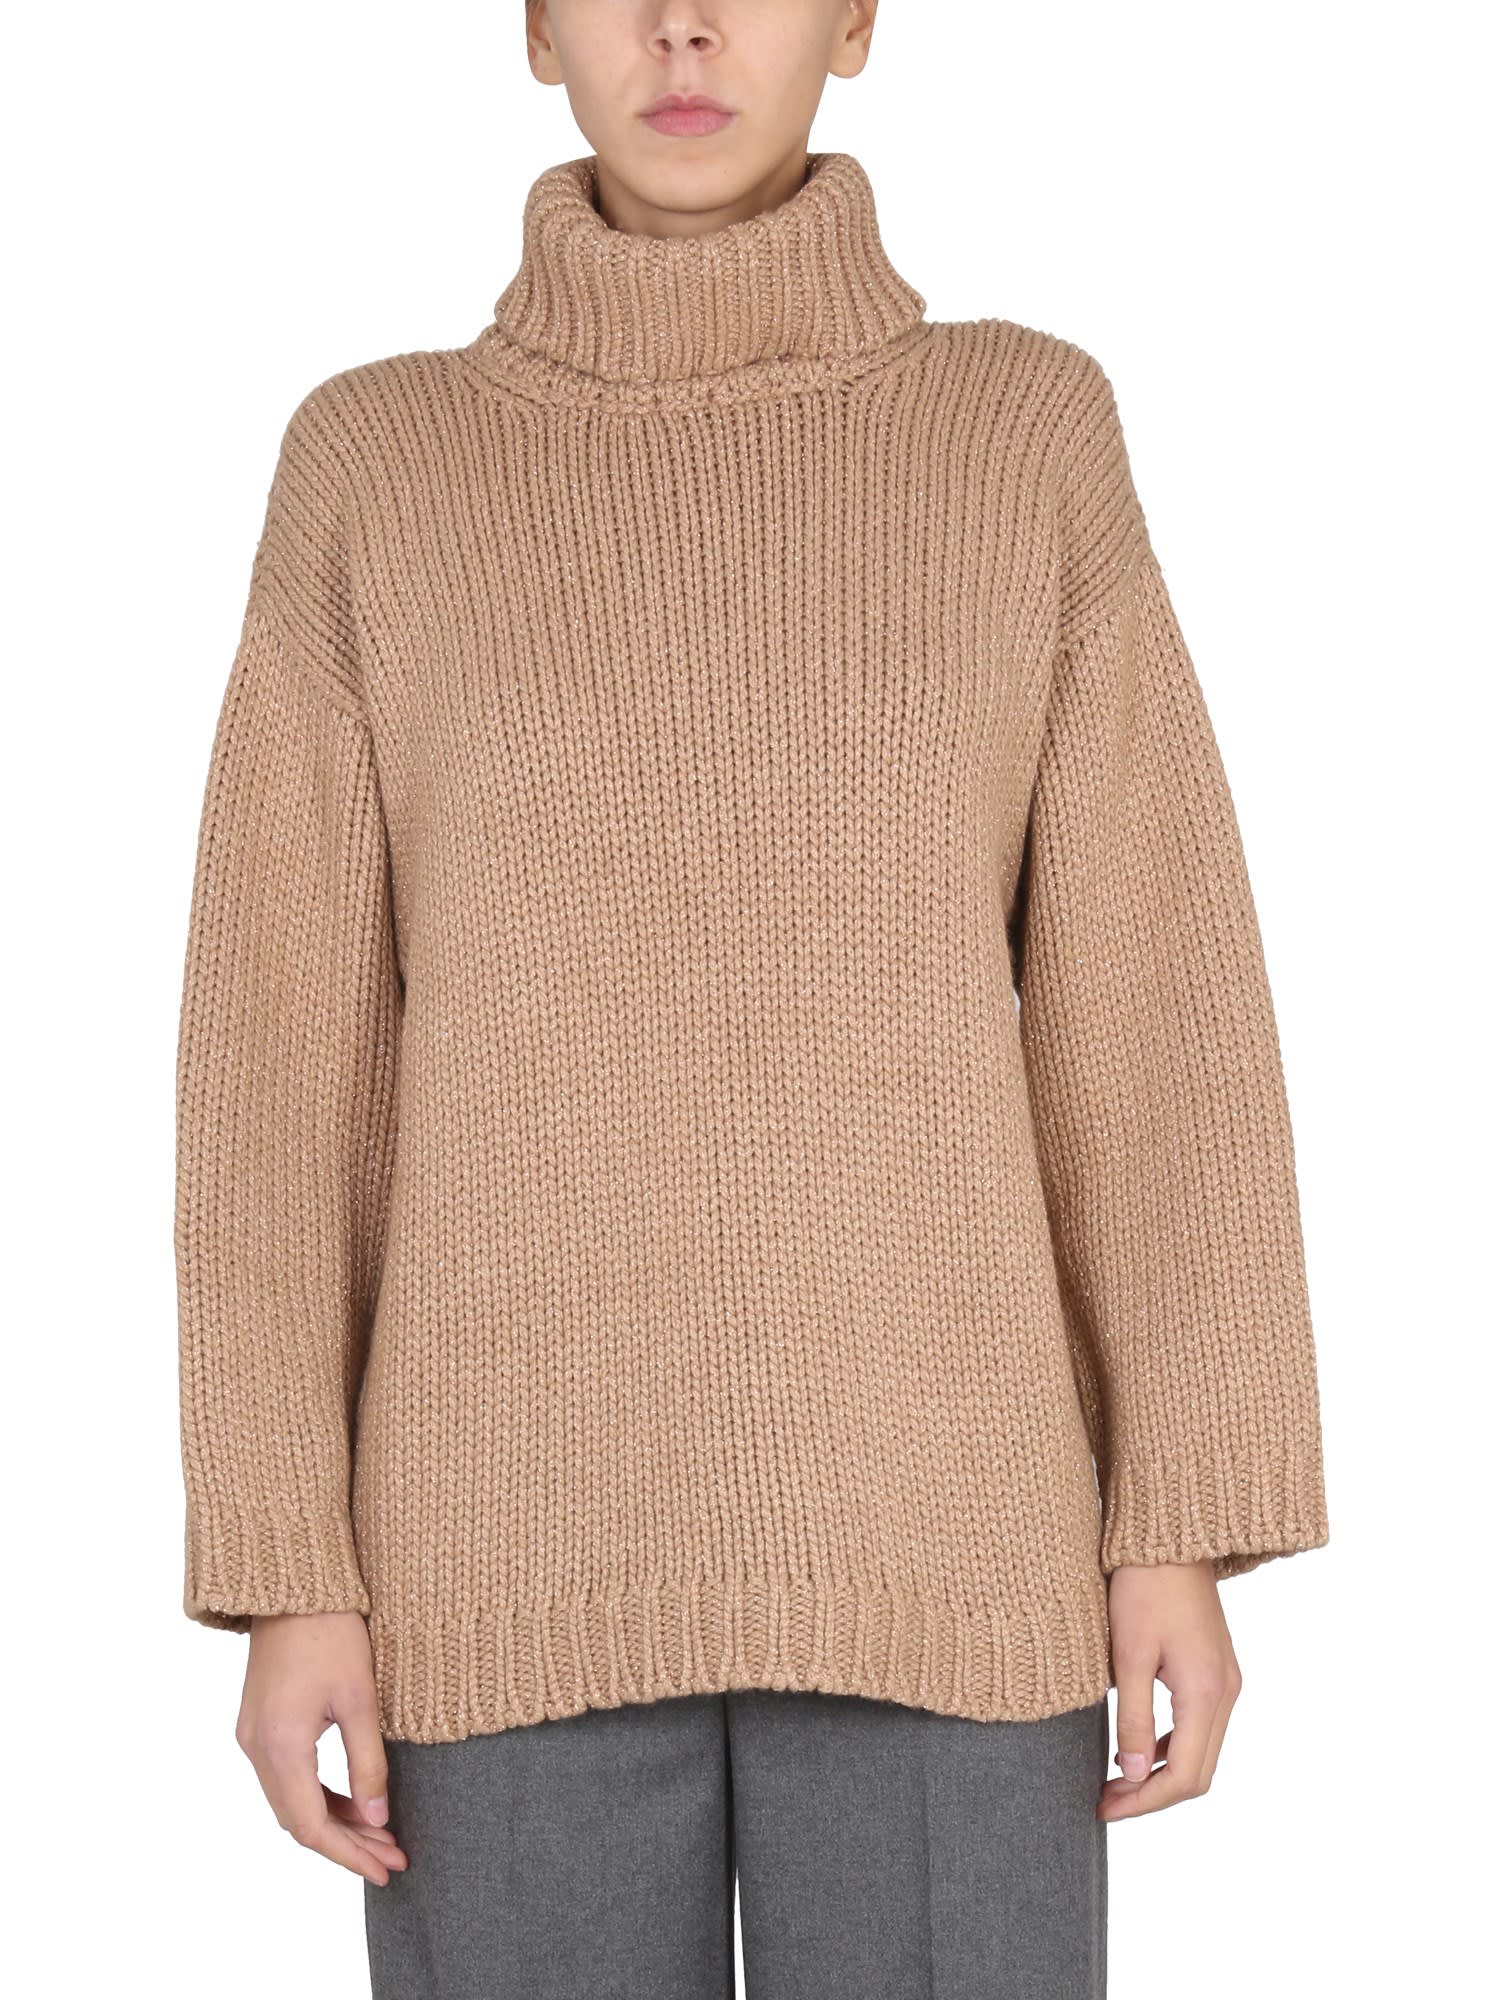 RED Valentino Wool And Lurex Blend Sweater